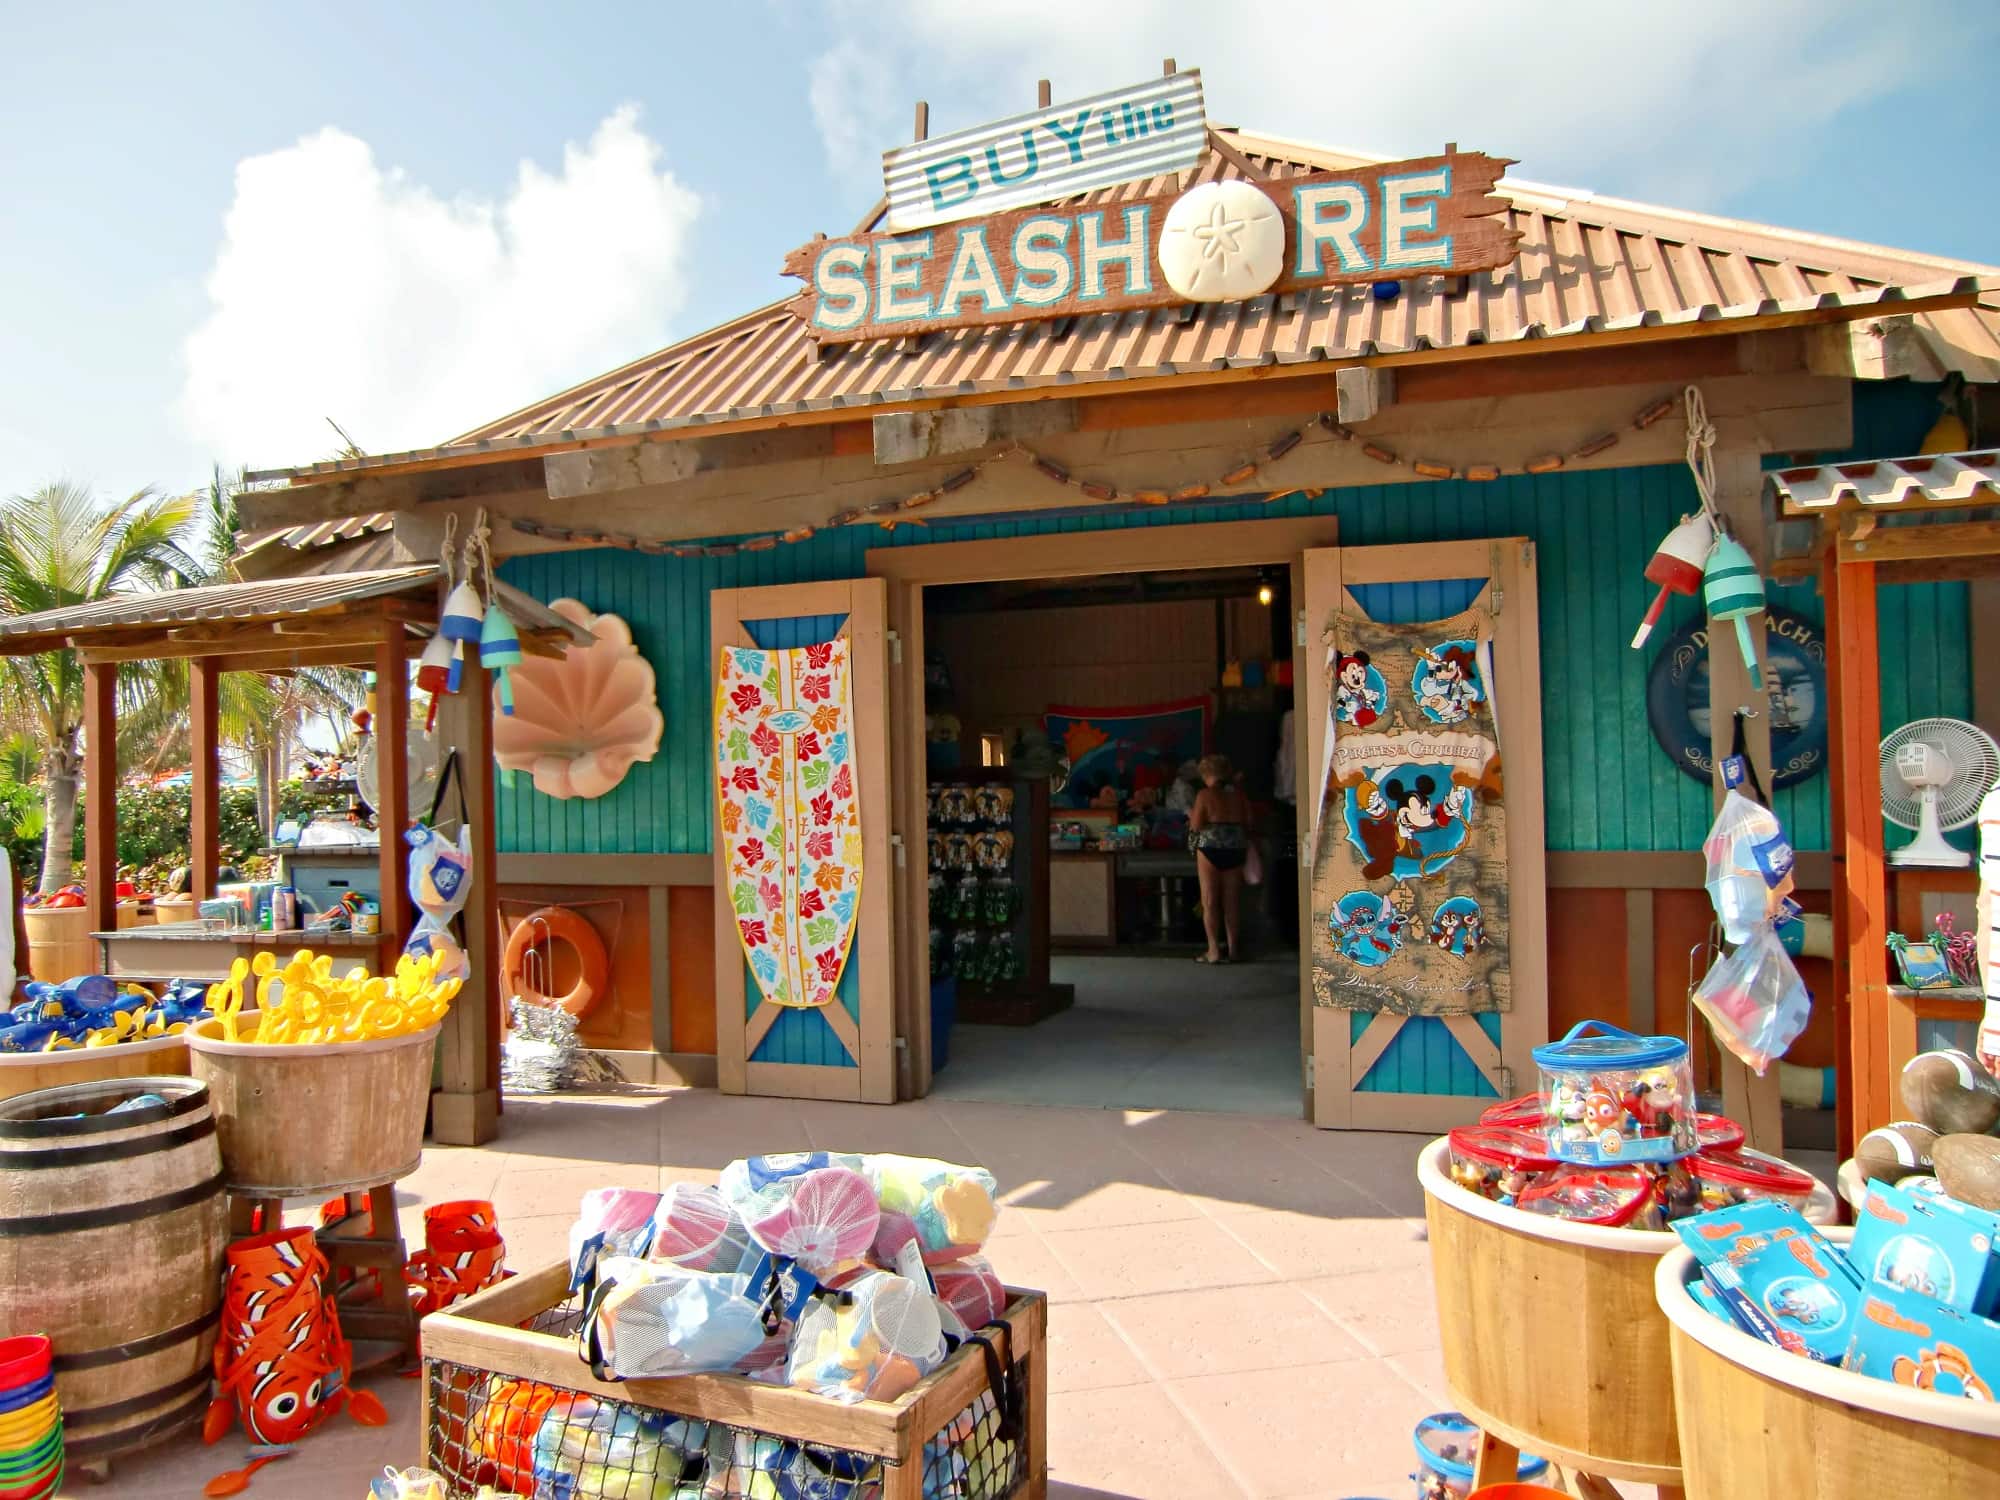 Be sure to buy Castaway Cay souvenirs on shore - they aren't available on the Disney Cruise Line ships.